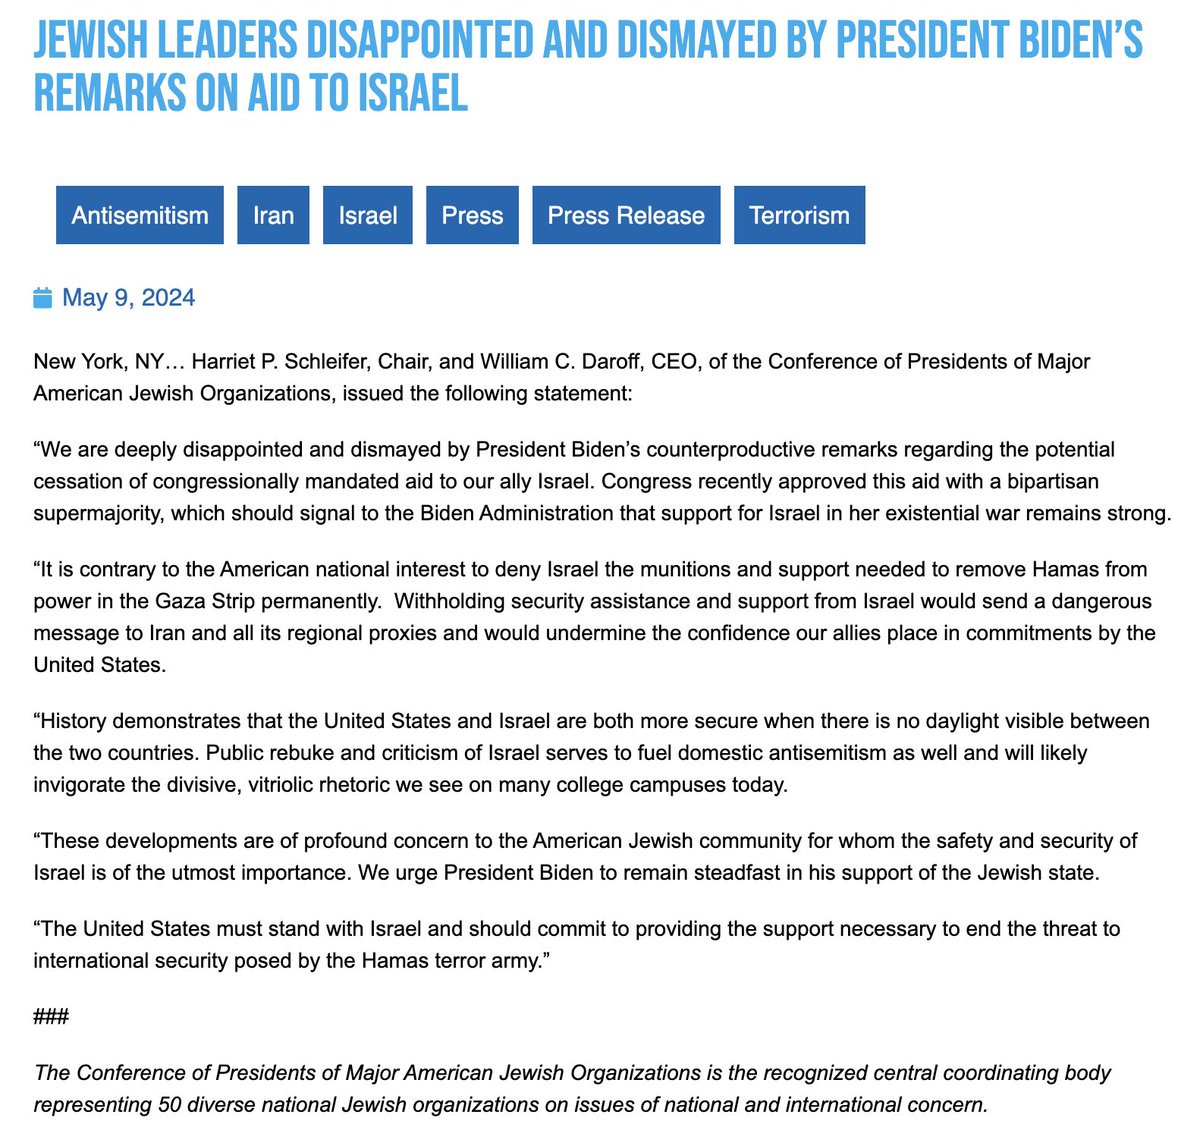 🚨📢 BREAKING: AMERICAN JEWISH LEADERS 'DISMAYED' BY BIDEN'S REMARKS ON AID TO ISRAEL New York, NY - Harriet P. Schleifer, Chair, and William C. Daroff, CEO, of the Conference of Presidents of Major American Jewish Organizations, issued the following statement: “We are deeply…